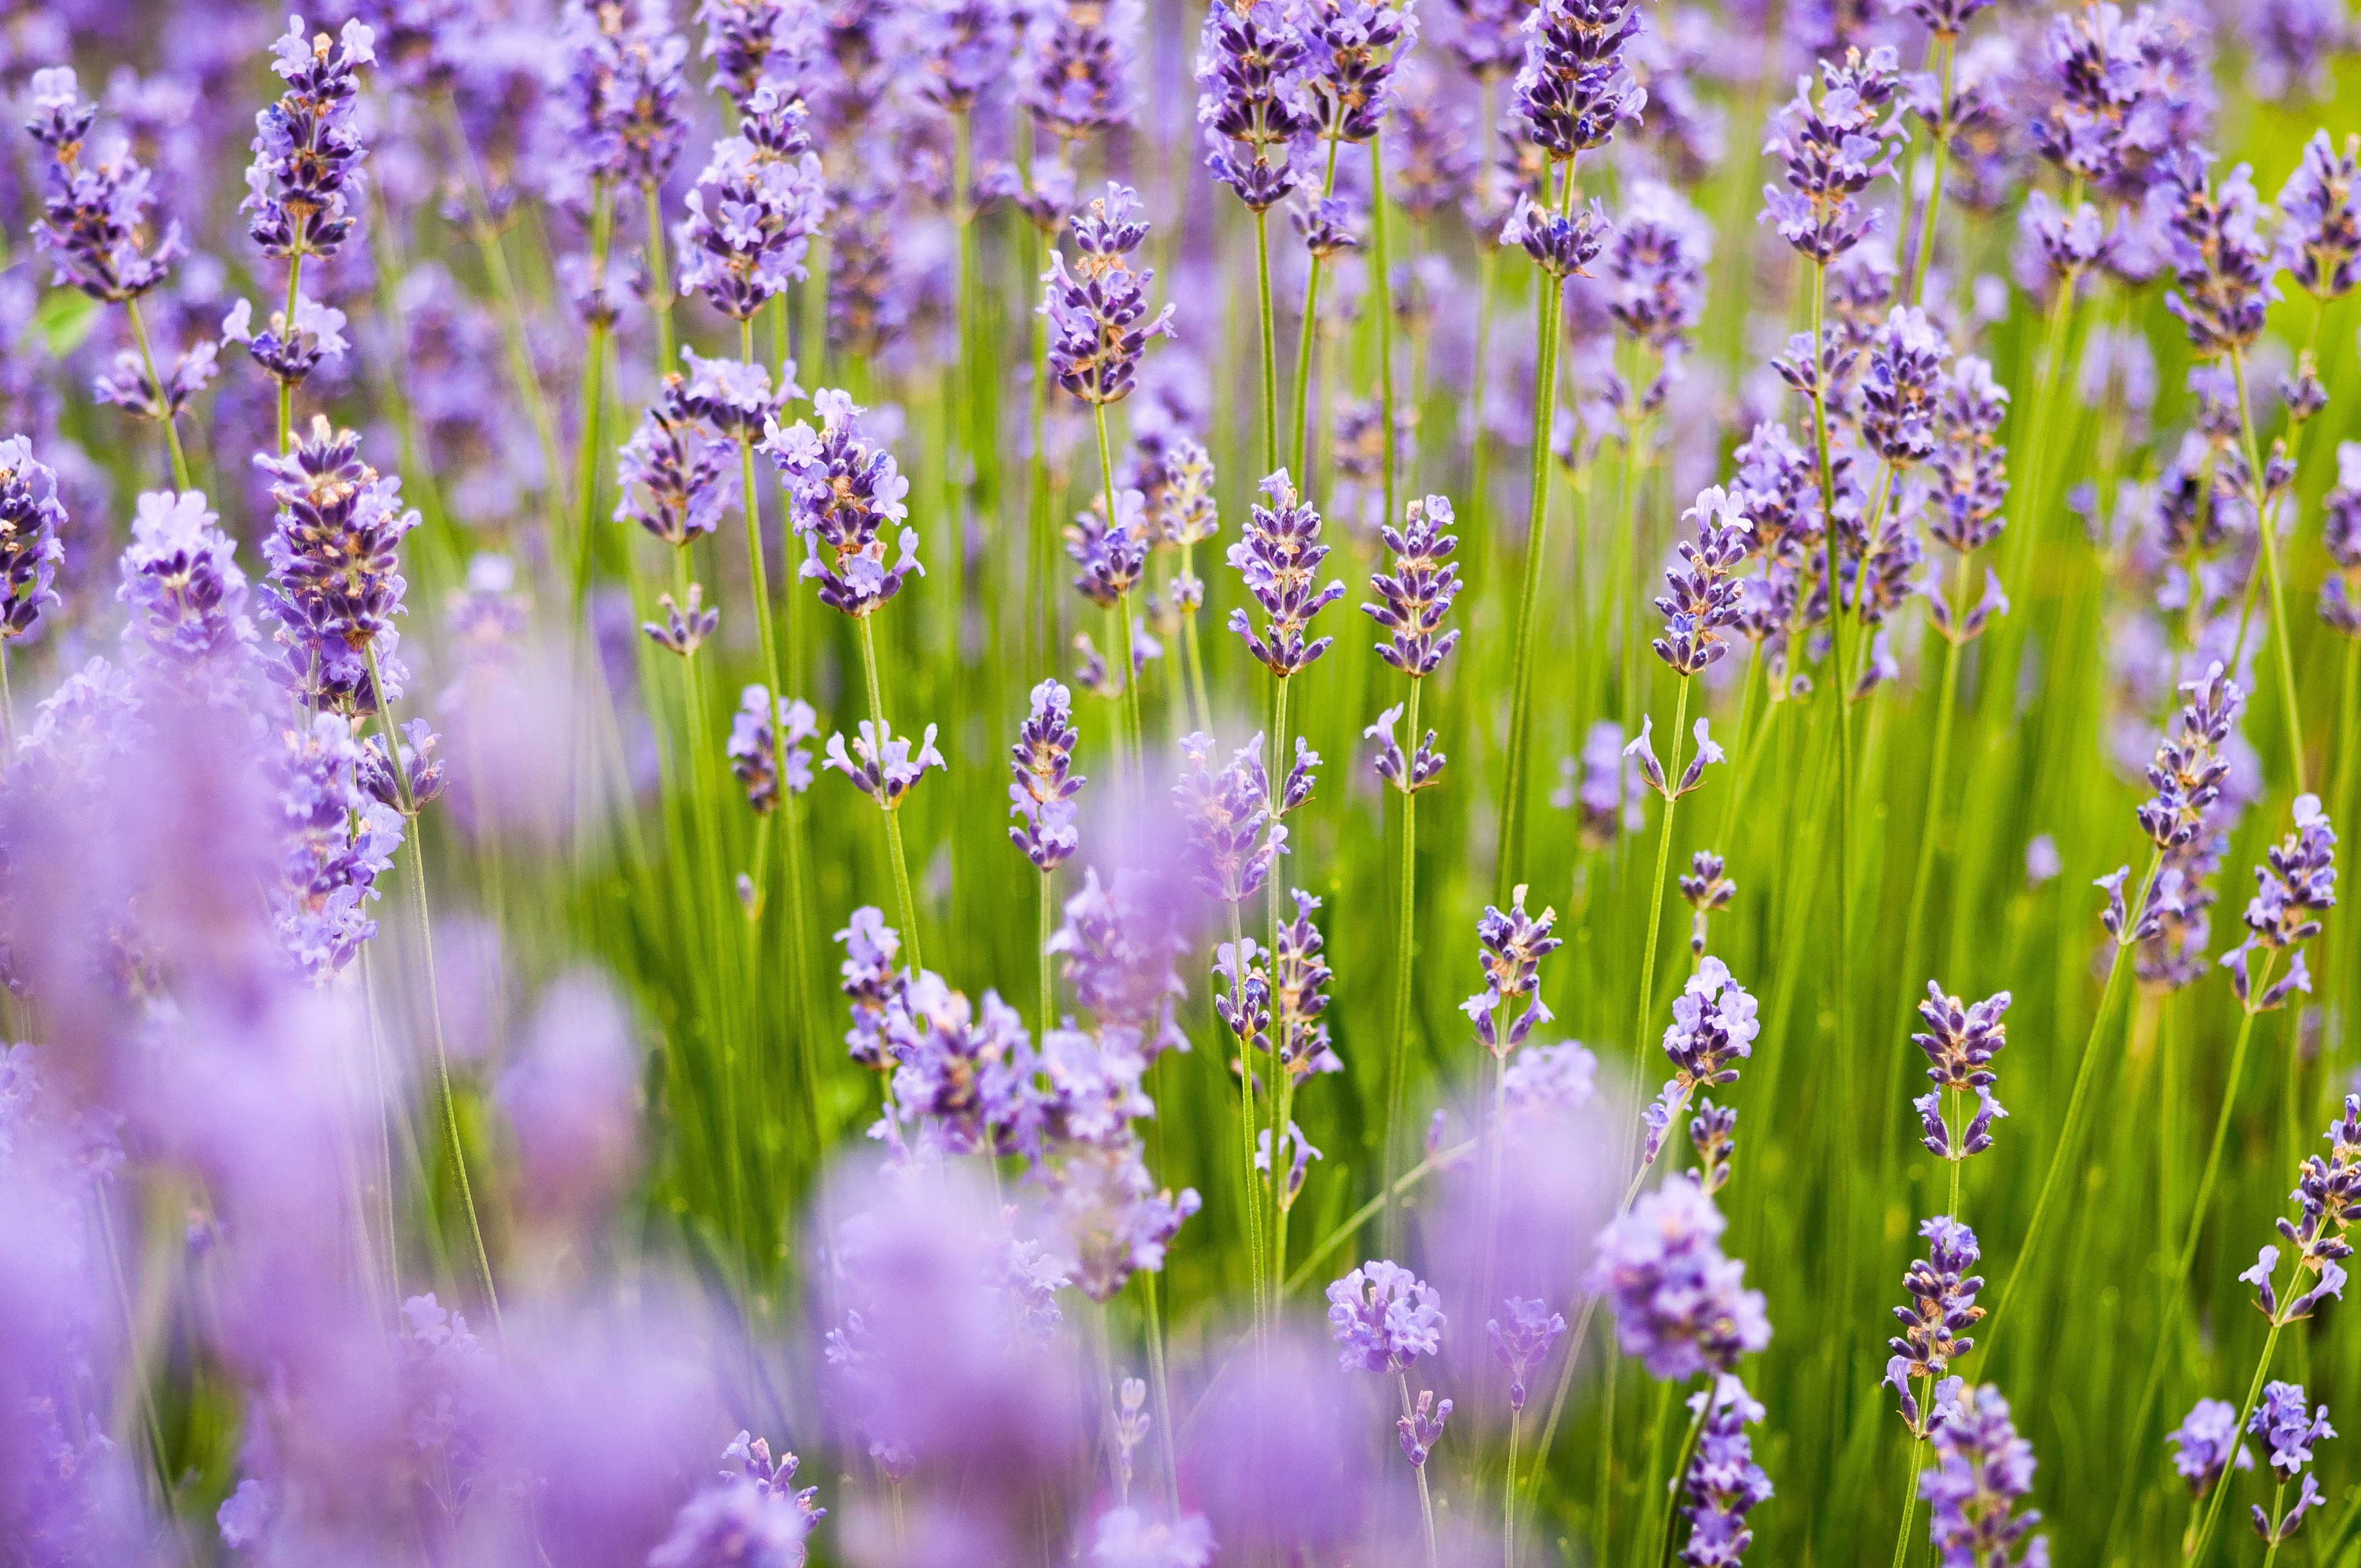 Profitable and growing crops: lavender, lavender and lavandin - Innovatione